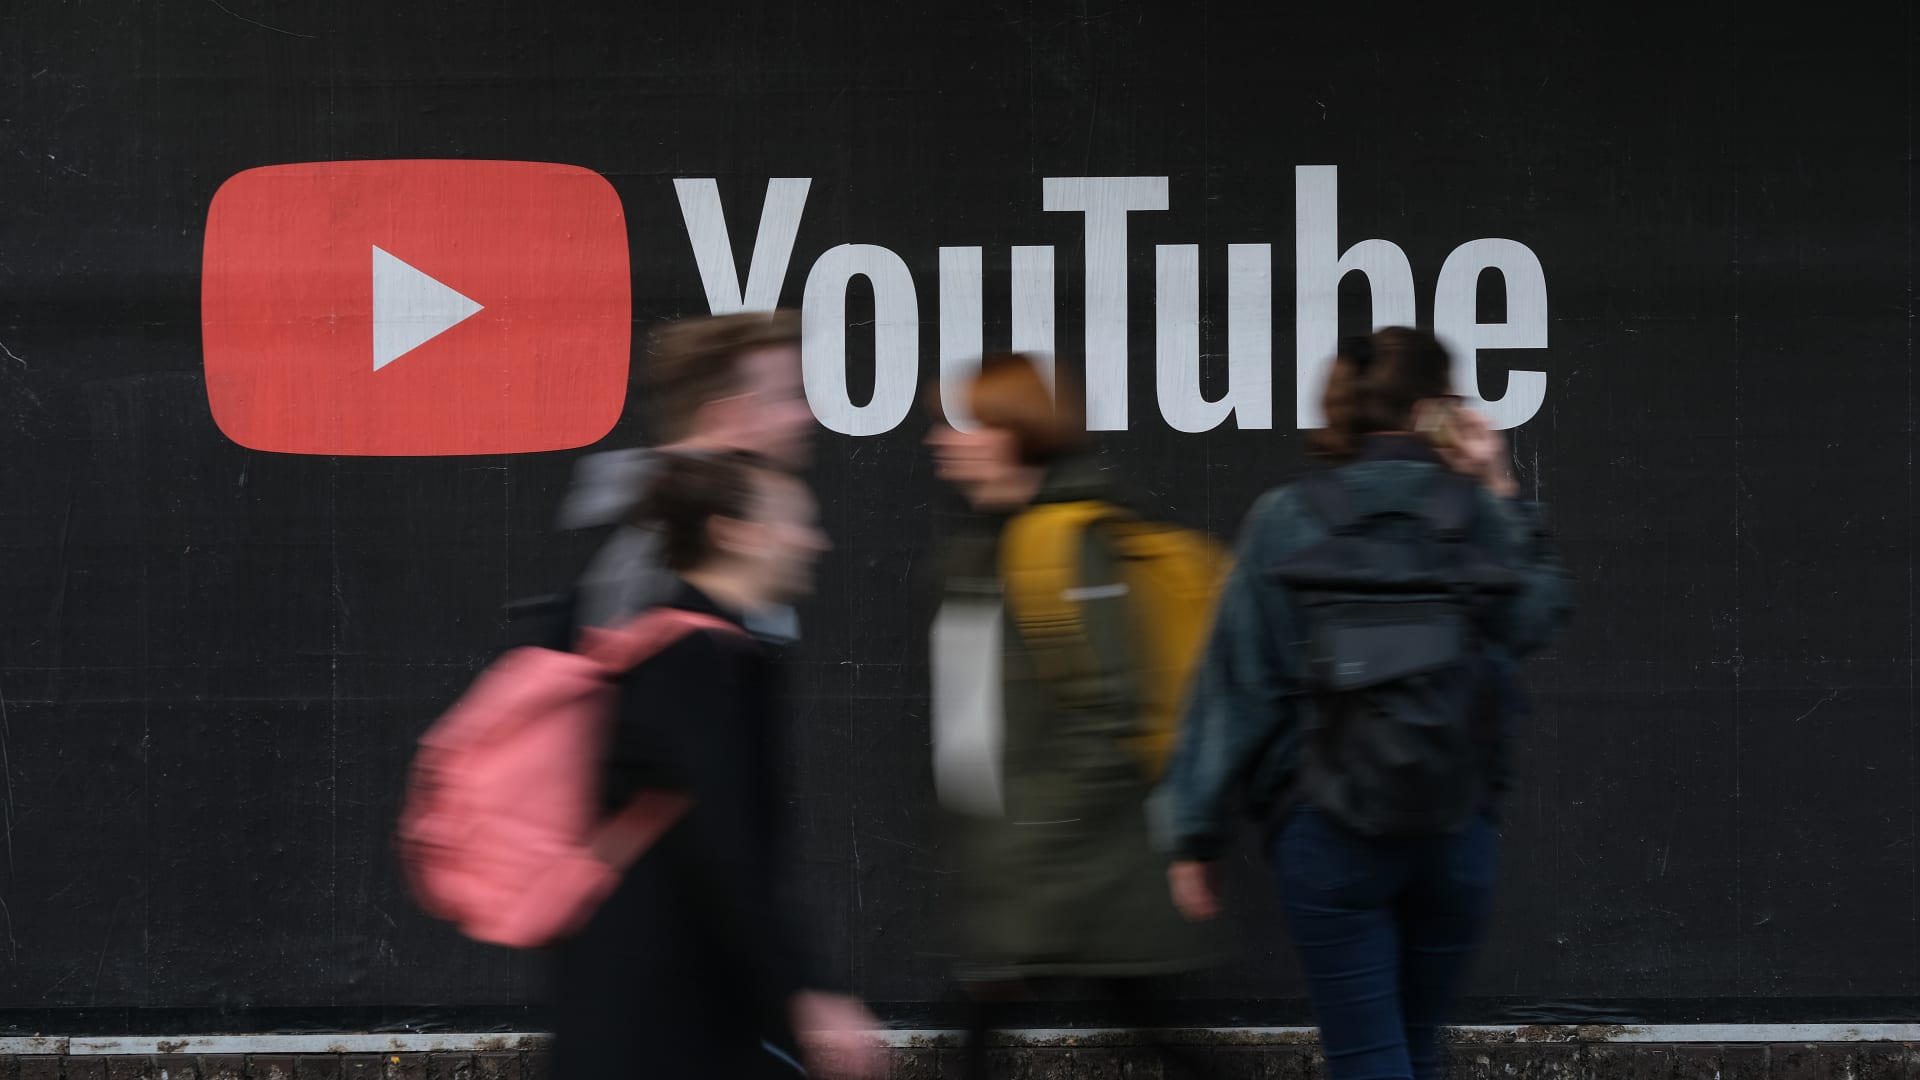 YouTube taps hospitals to create videos to help people witnessing an overdose or heart attack